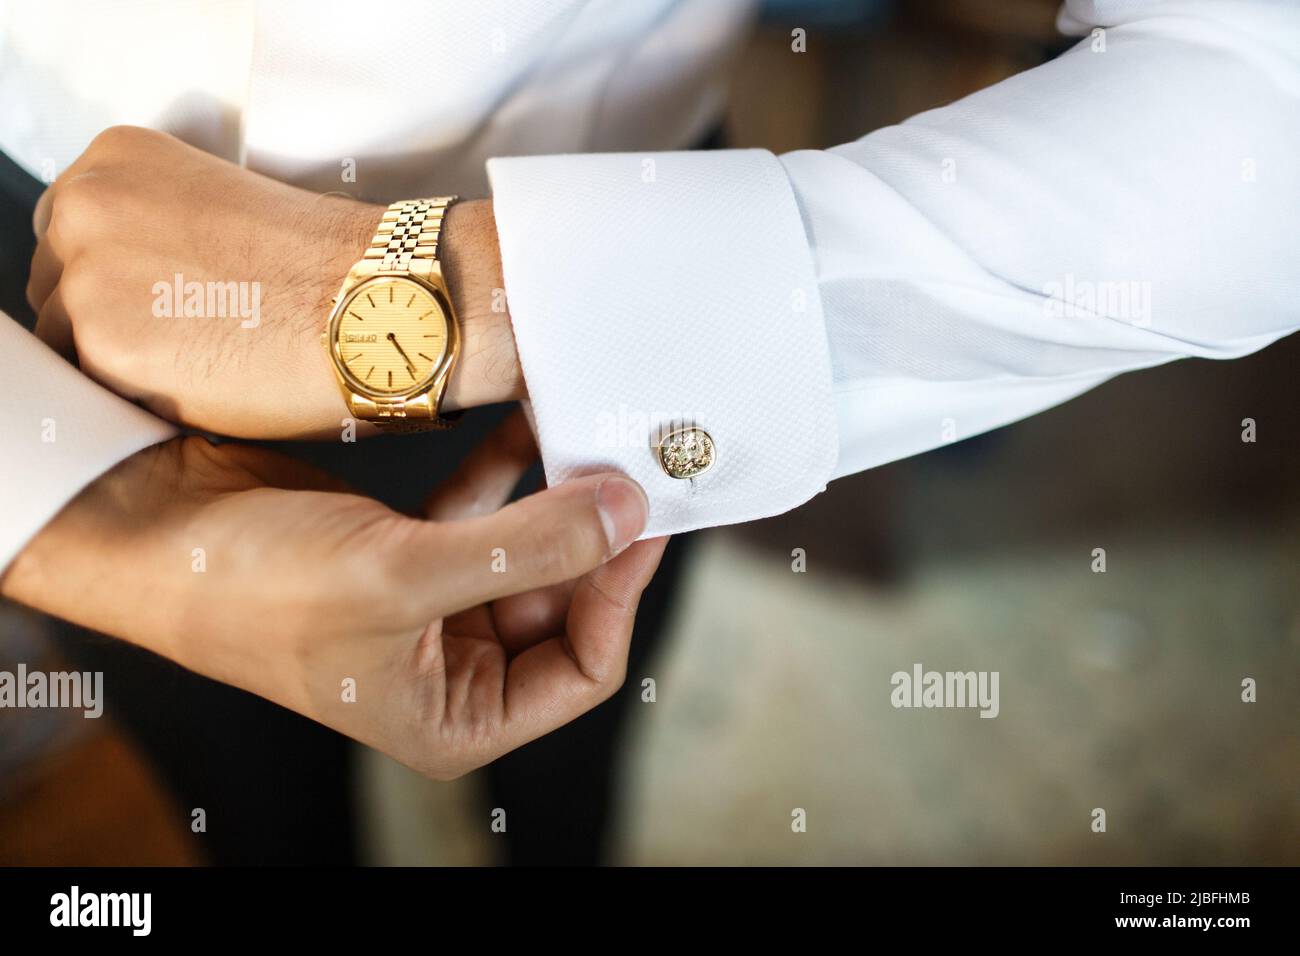 The groom fastens his cufflink at the wedding gathering. Stock Photo